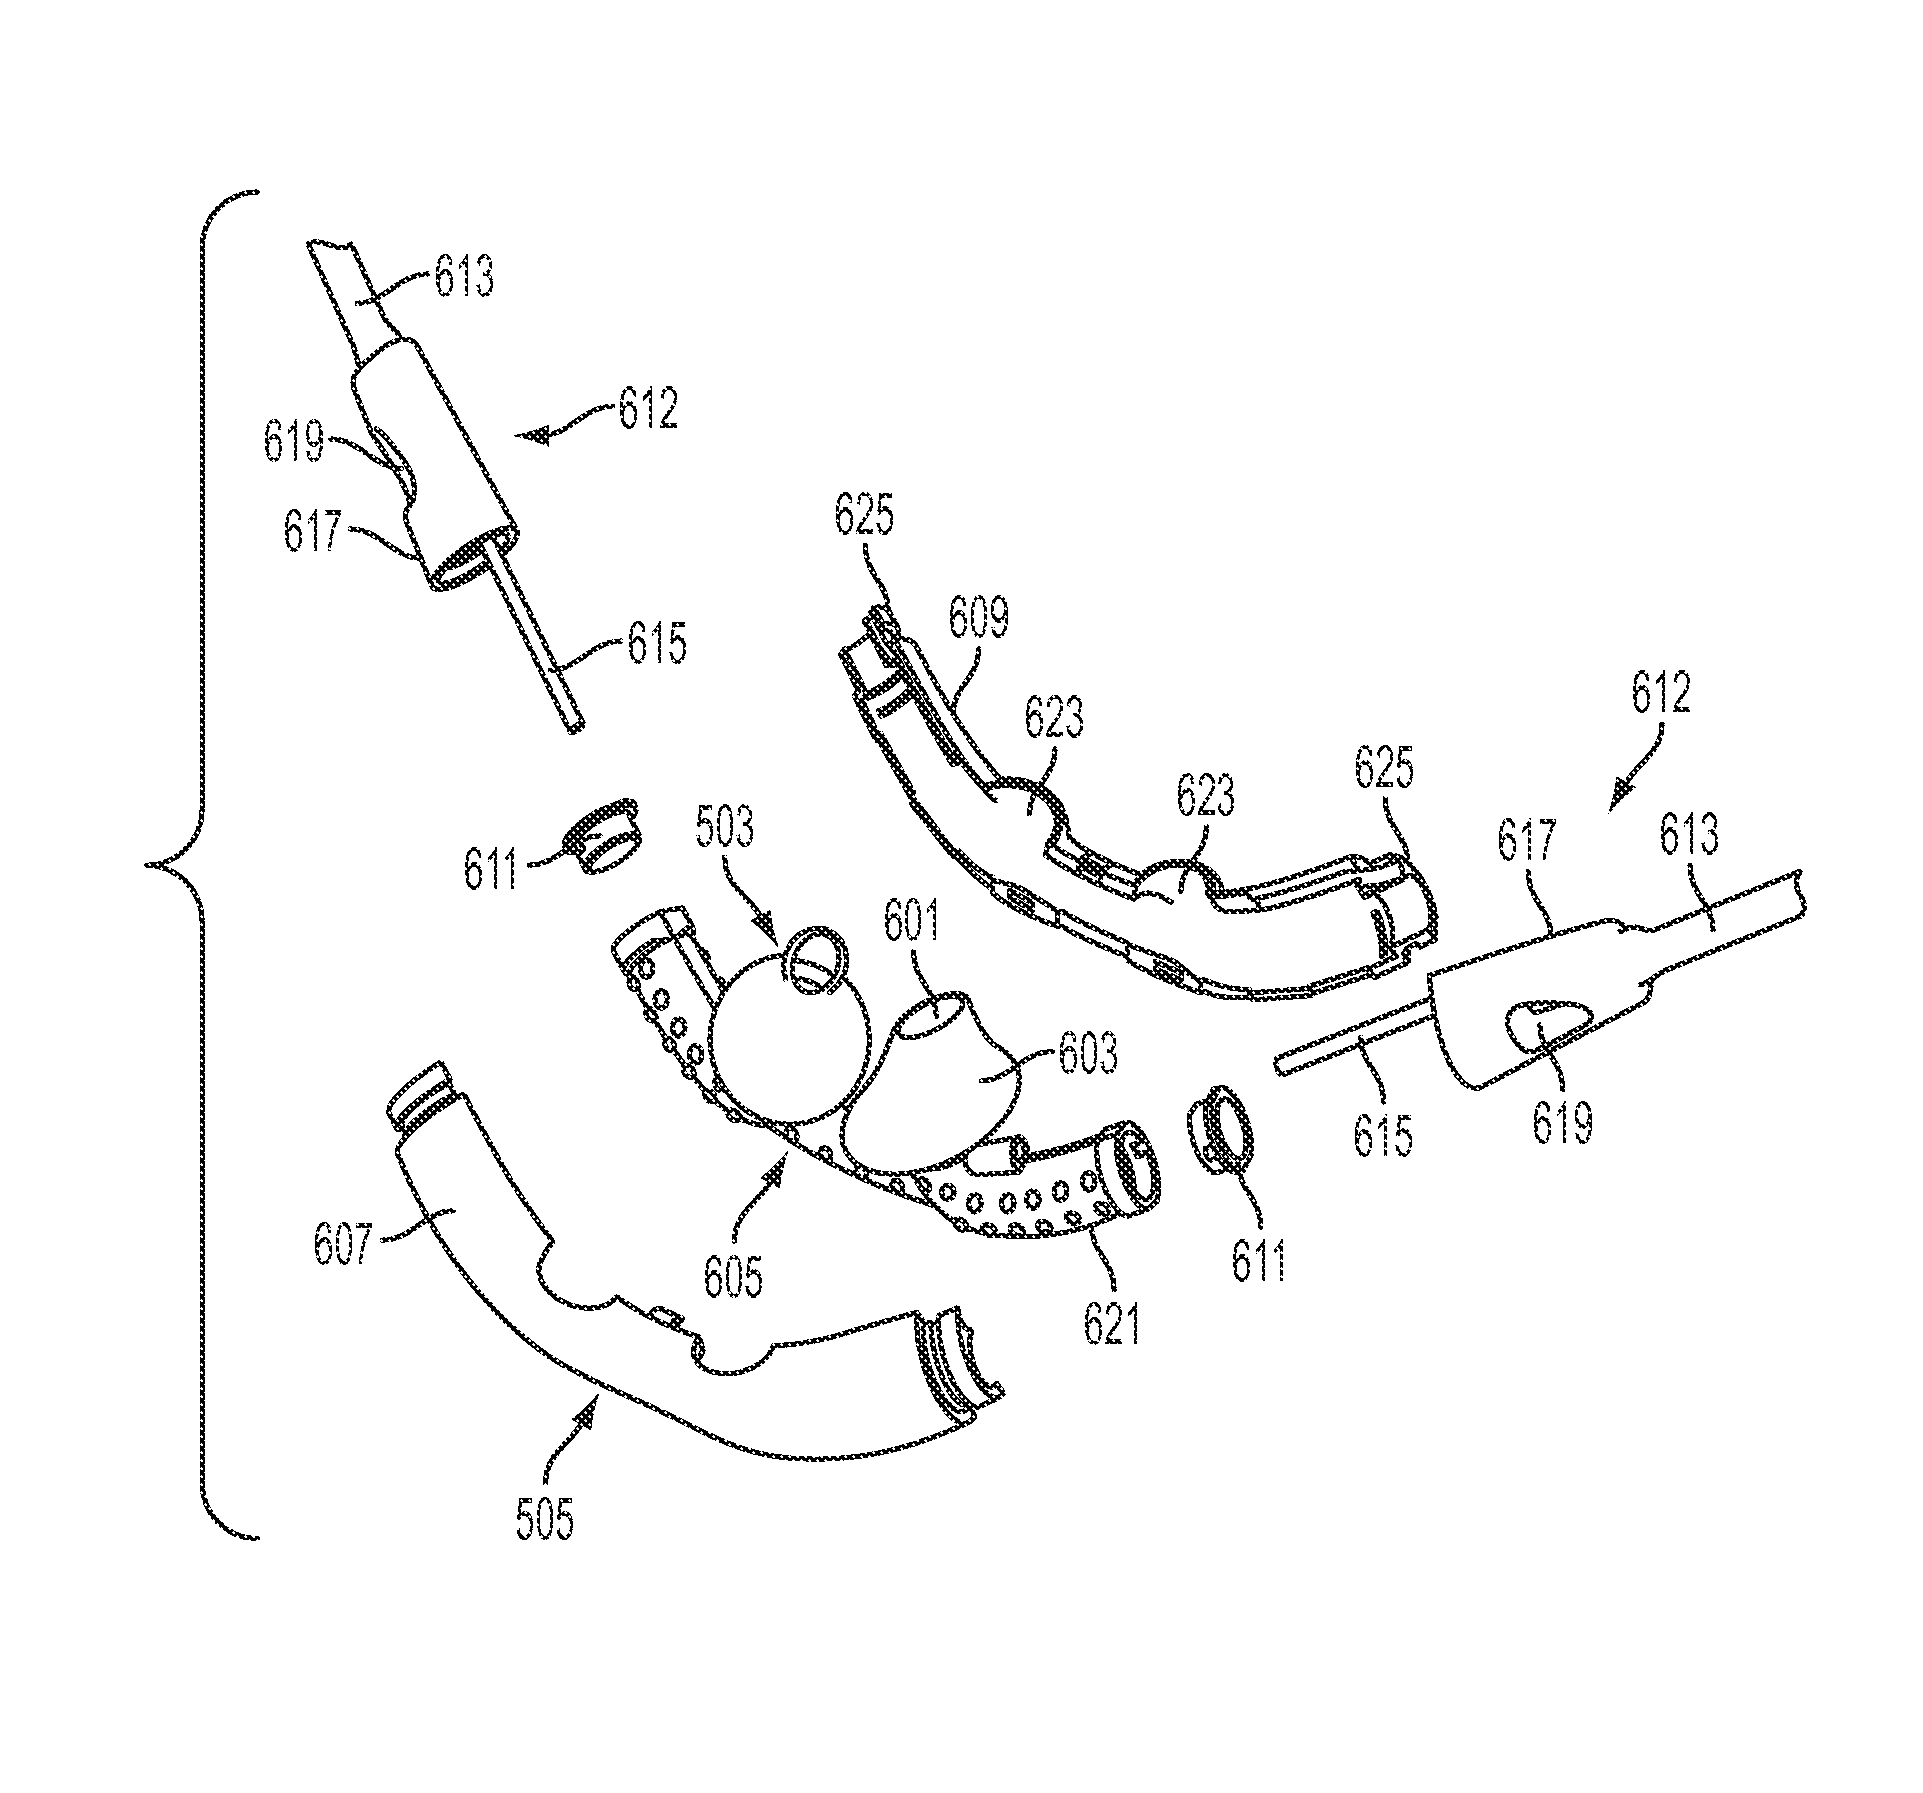 Methods, systems and devices for ventilation using a nasal ventilation mask with a manifold and internal compliant tube and nasal sealing cushion assembly